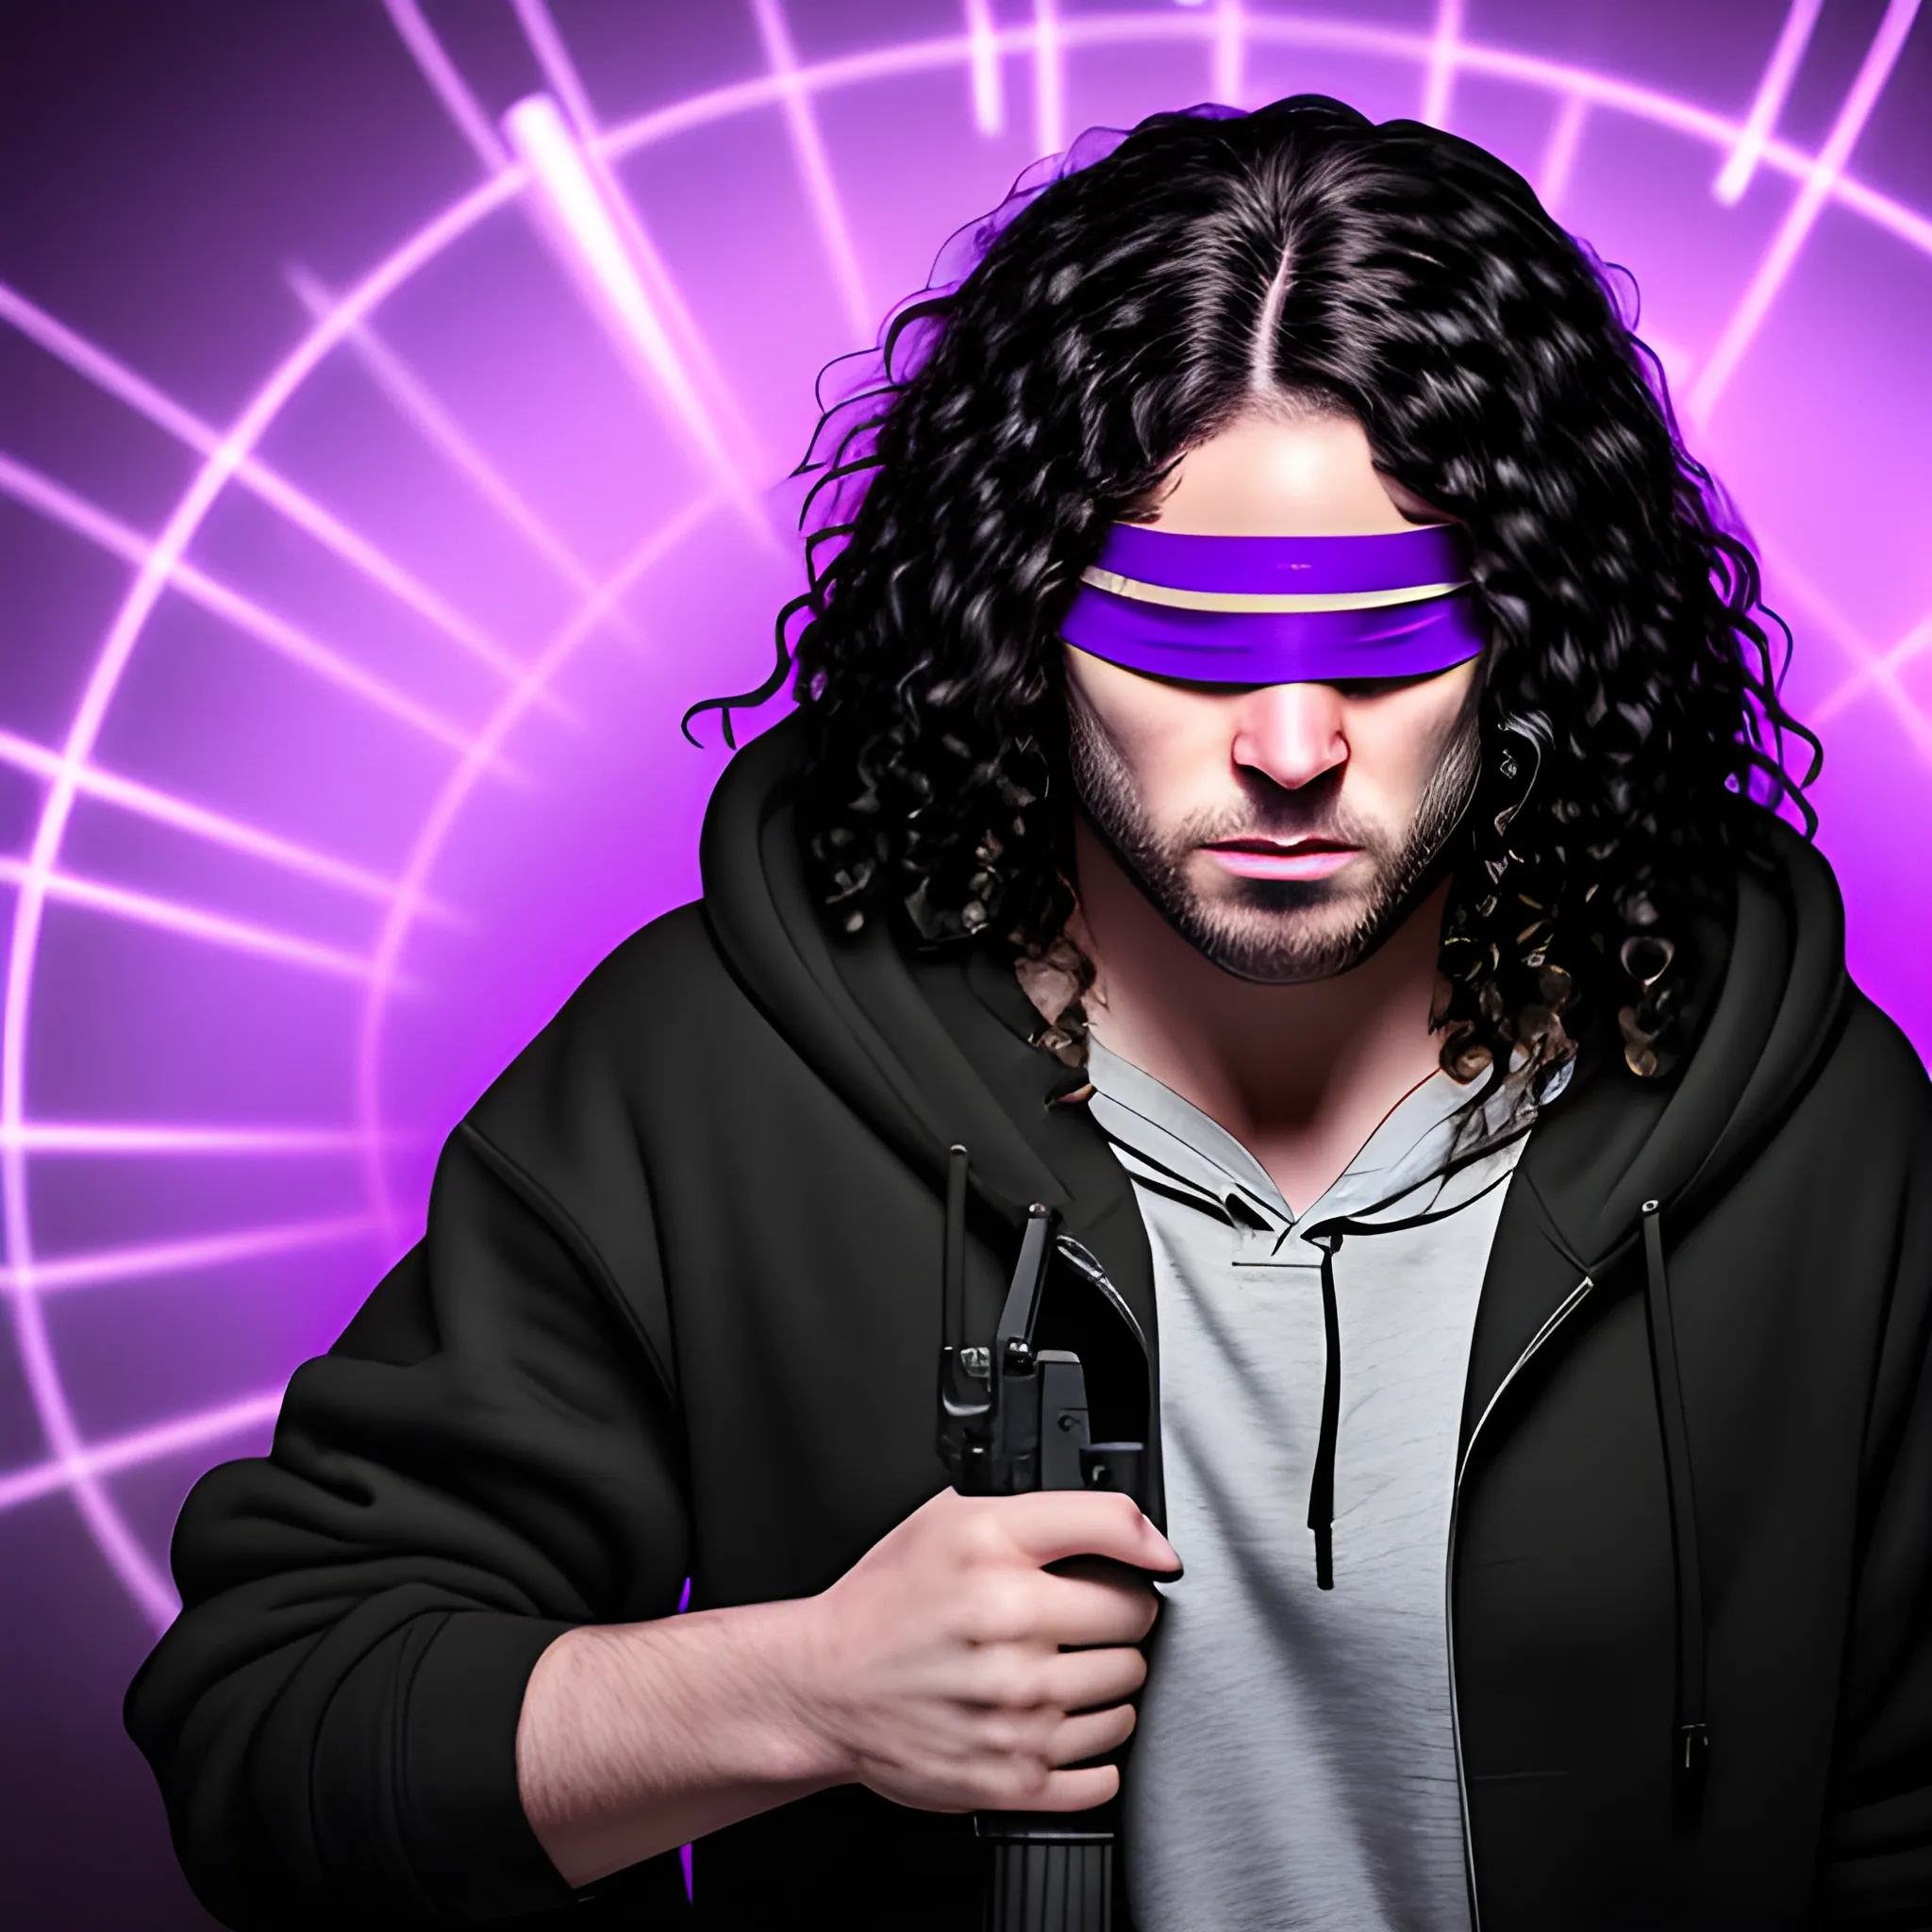 A white man with long black curly hair, with a black blindfold over his eyes on, a white hoodie and a look of fear and betrayal on his face, holding a gun. And a purple light from behind him